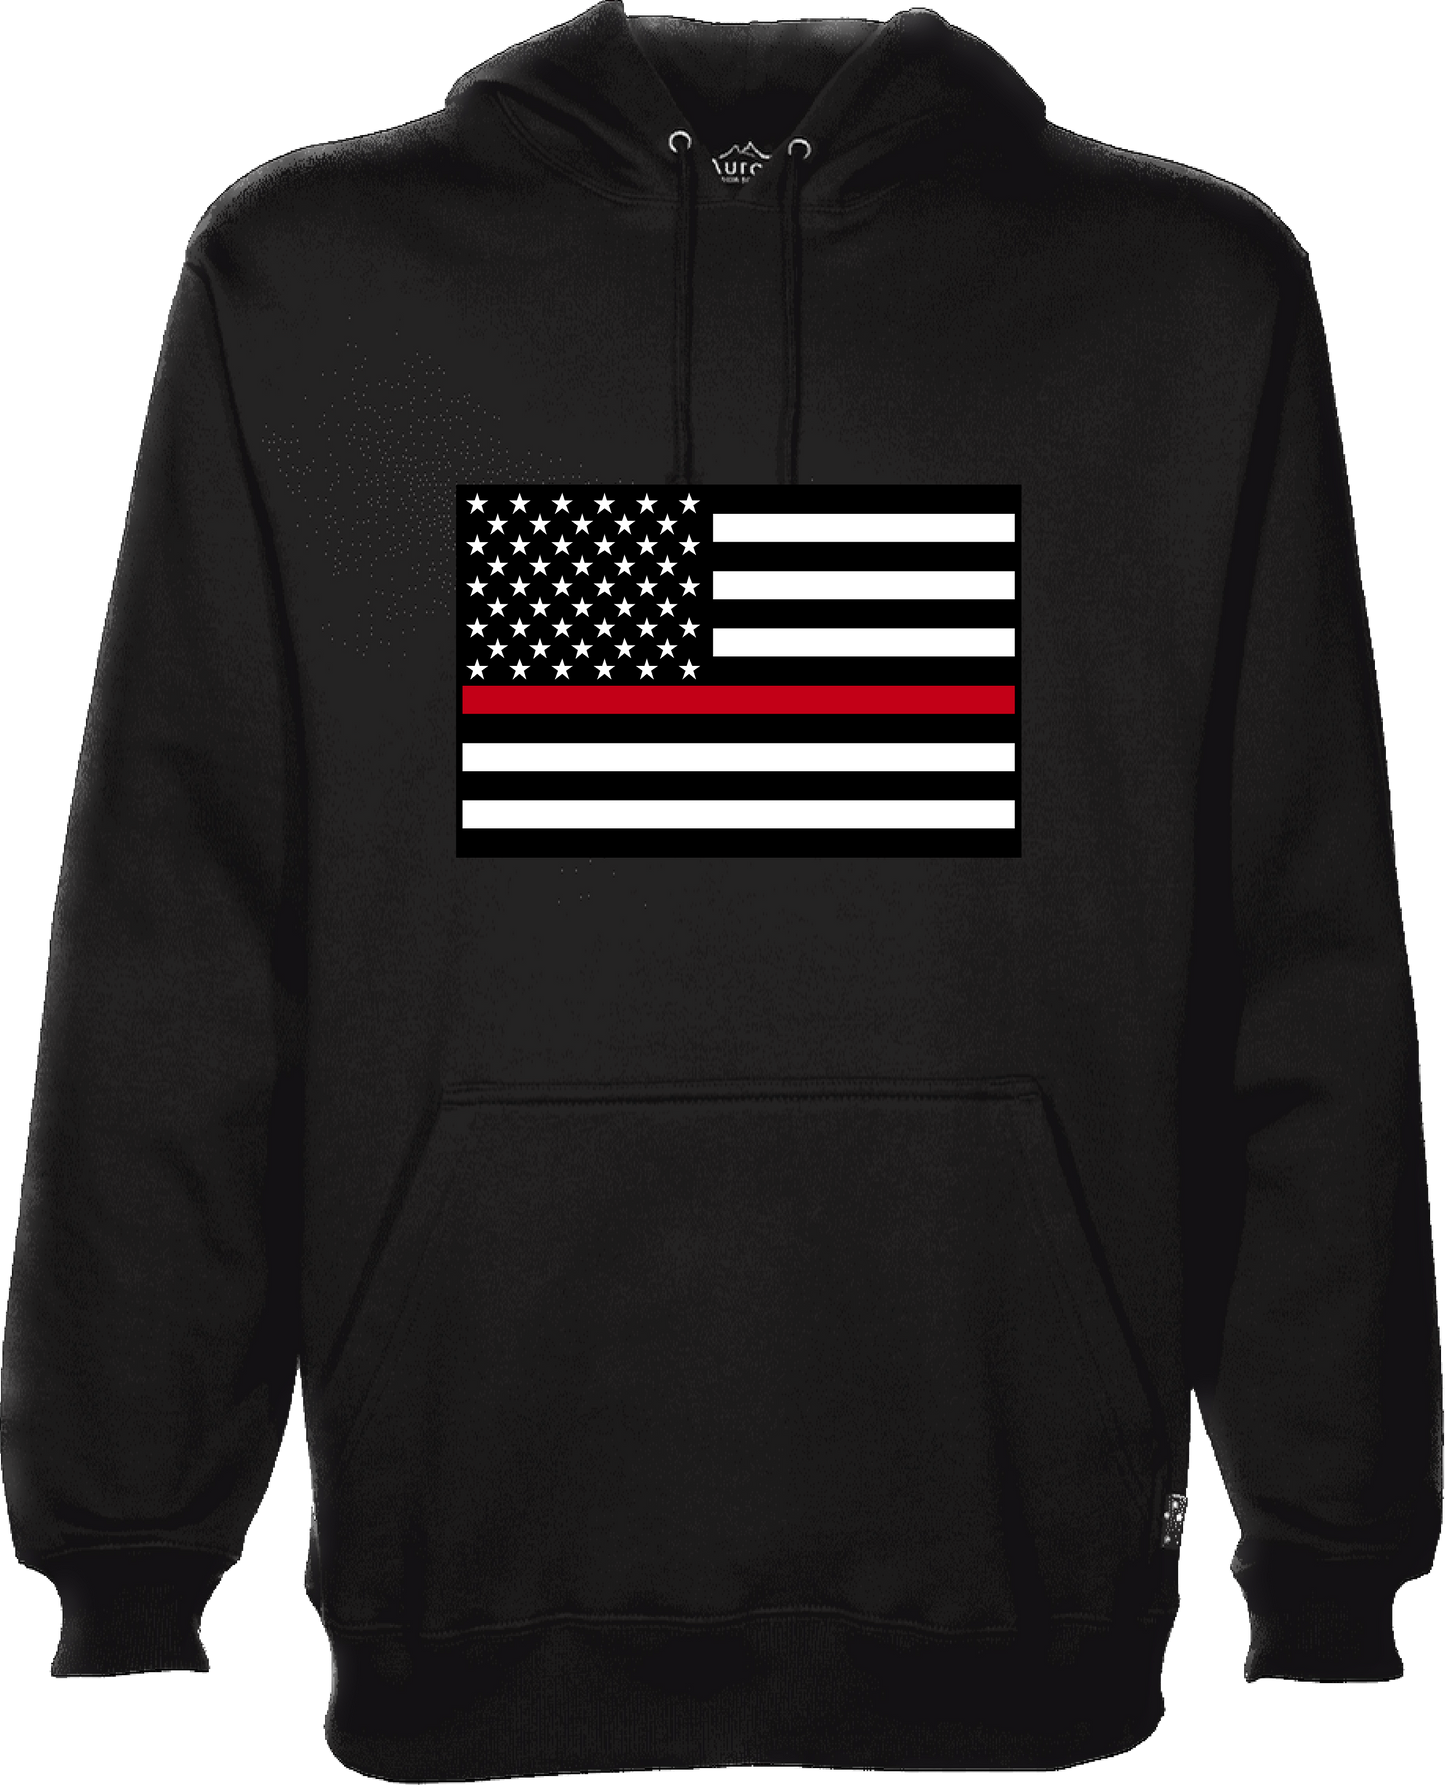 Thin Red Line American Flag Sweater